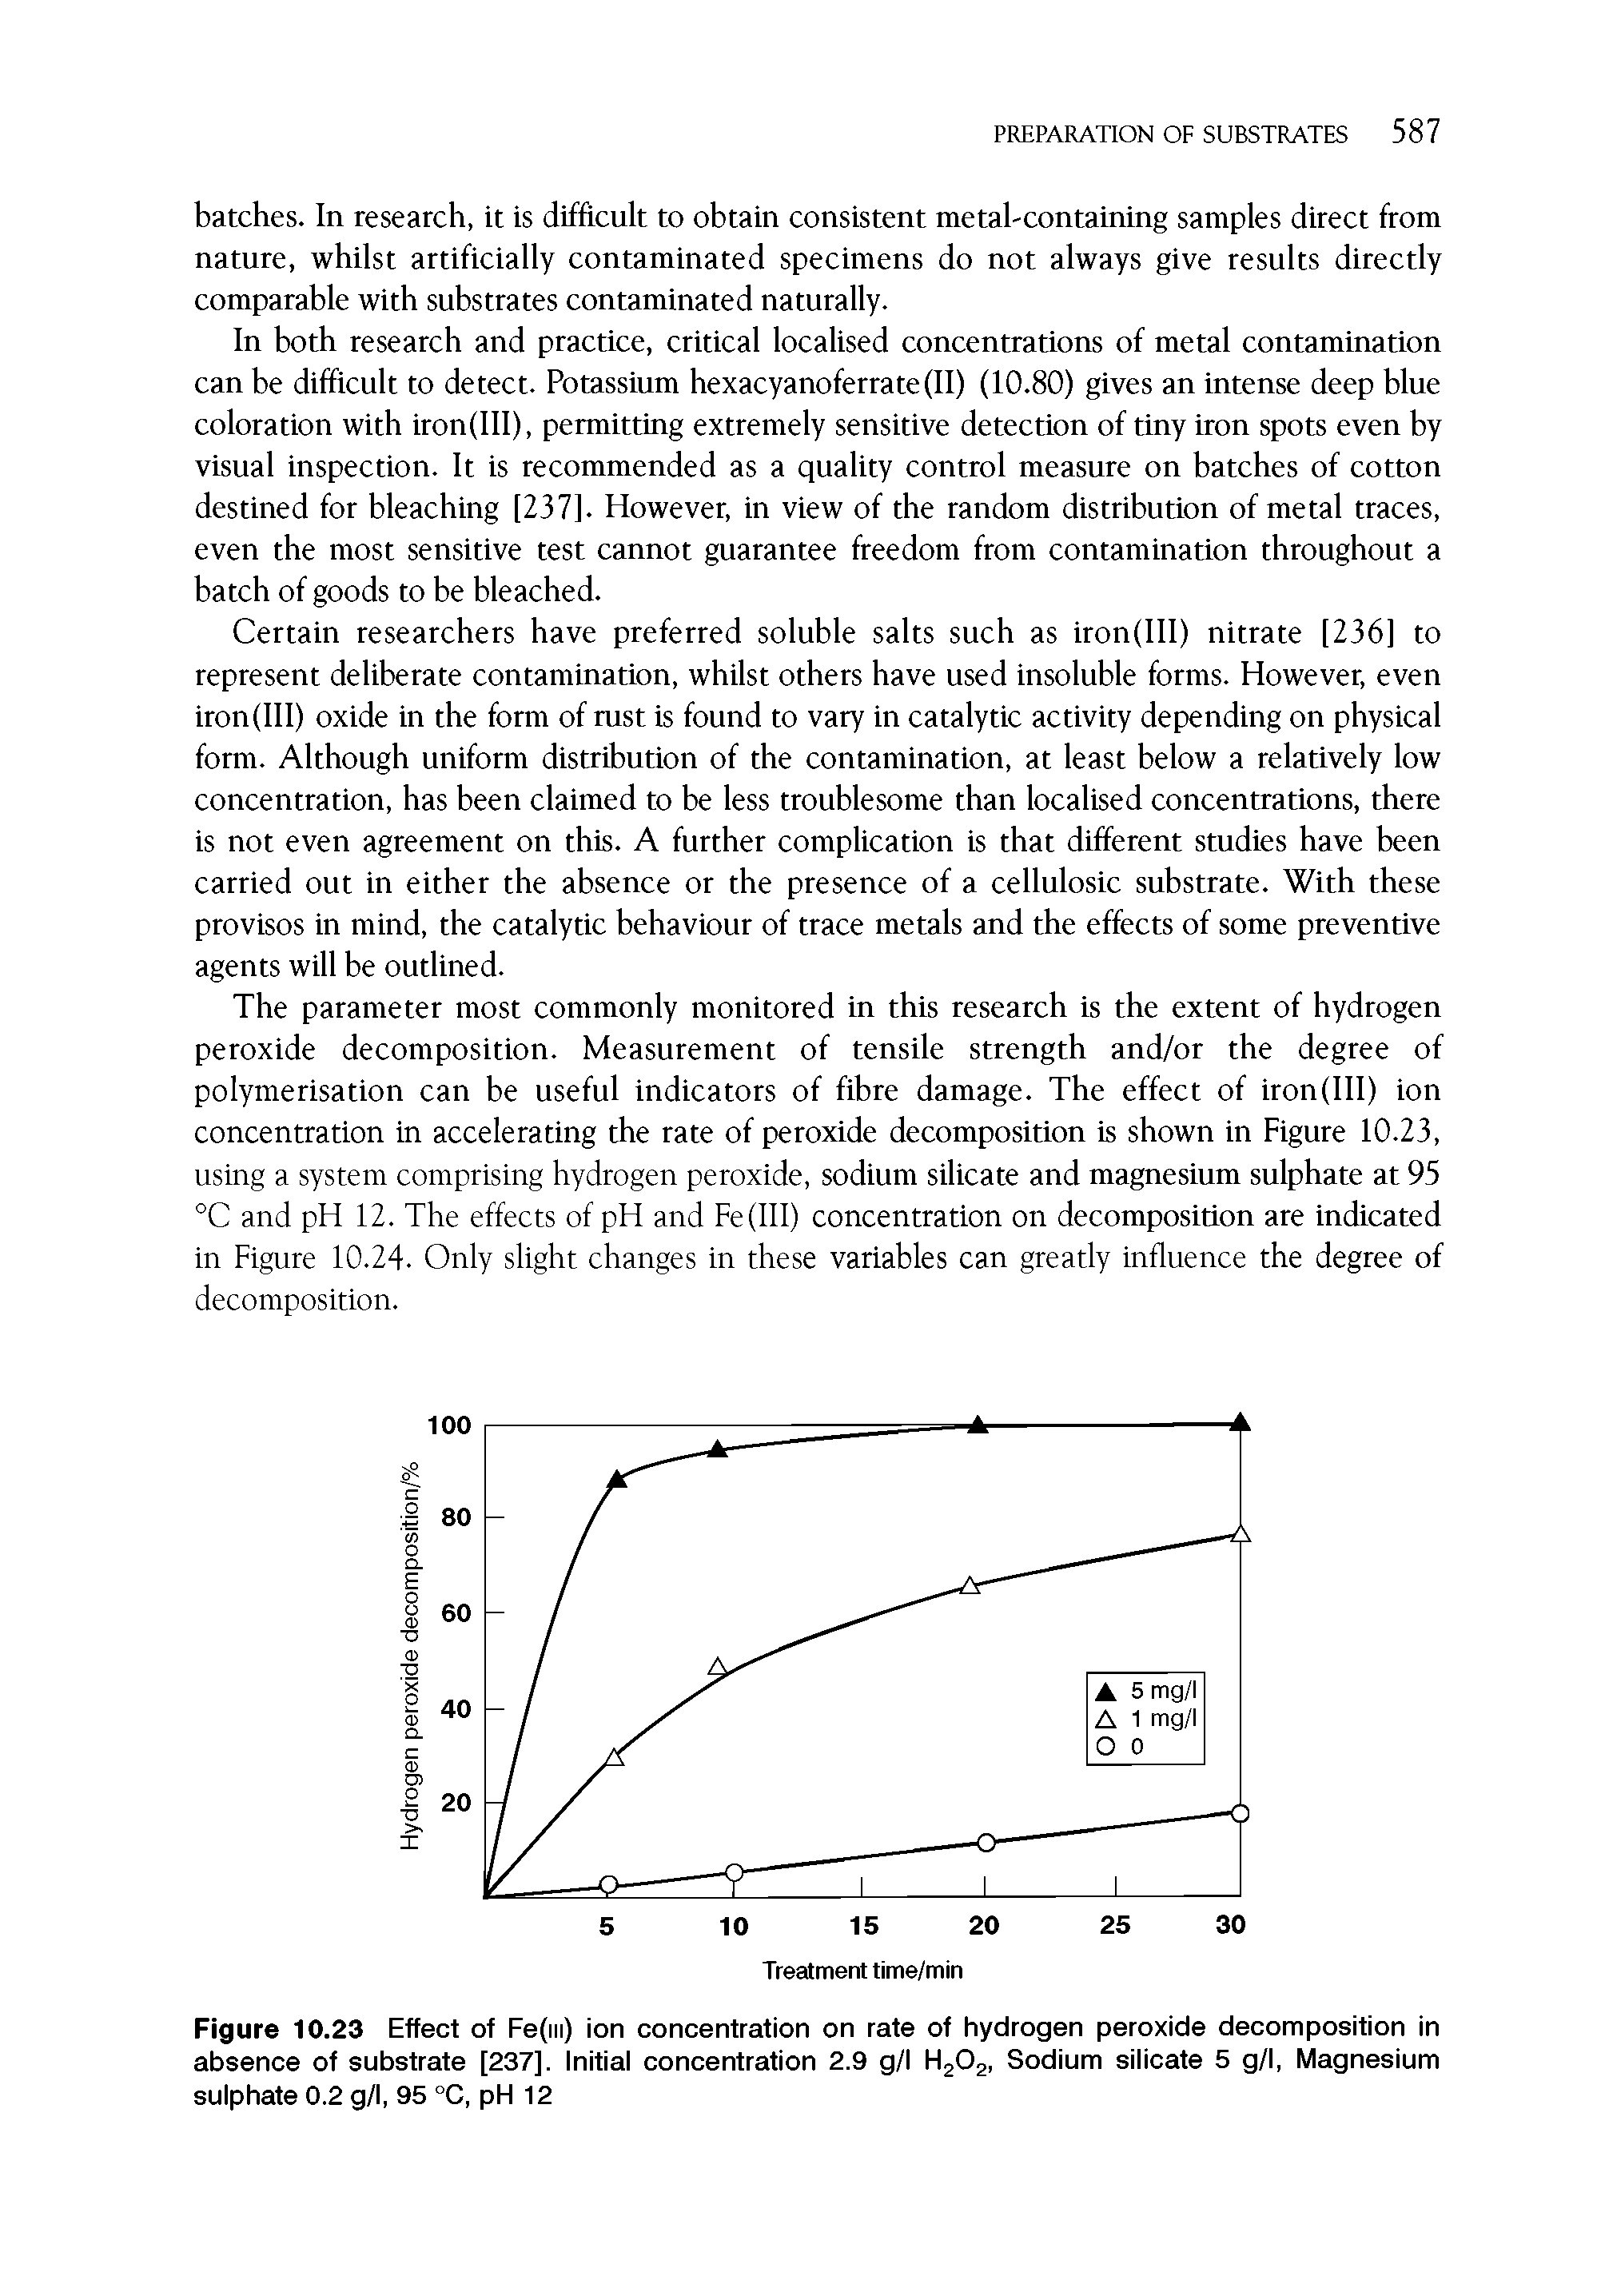 Figure 10.23 Effect of Fe(m) ion concentration on rate of hydrogen peroxide decomposition in absence of substrate [237]. Initial concentration 2.9 g/l H202, Sodium silicate 5 g/l, Magnesium sulphate 0.2 g/l, 95 °C, pH 12...